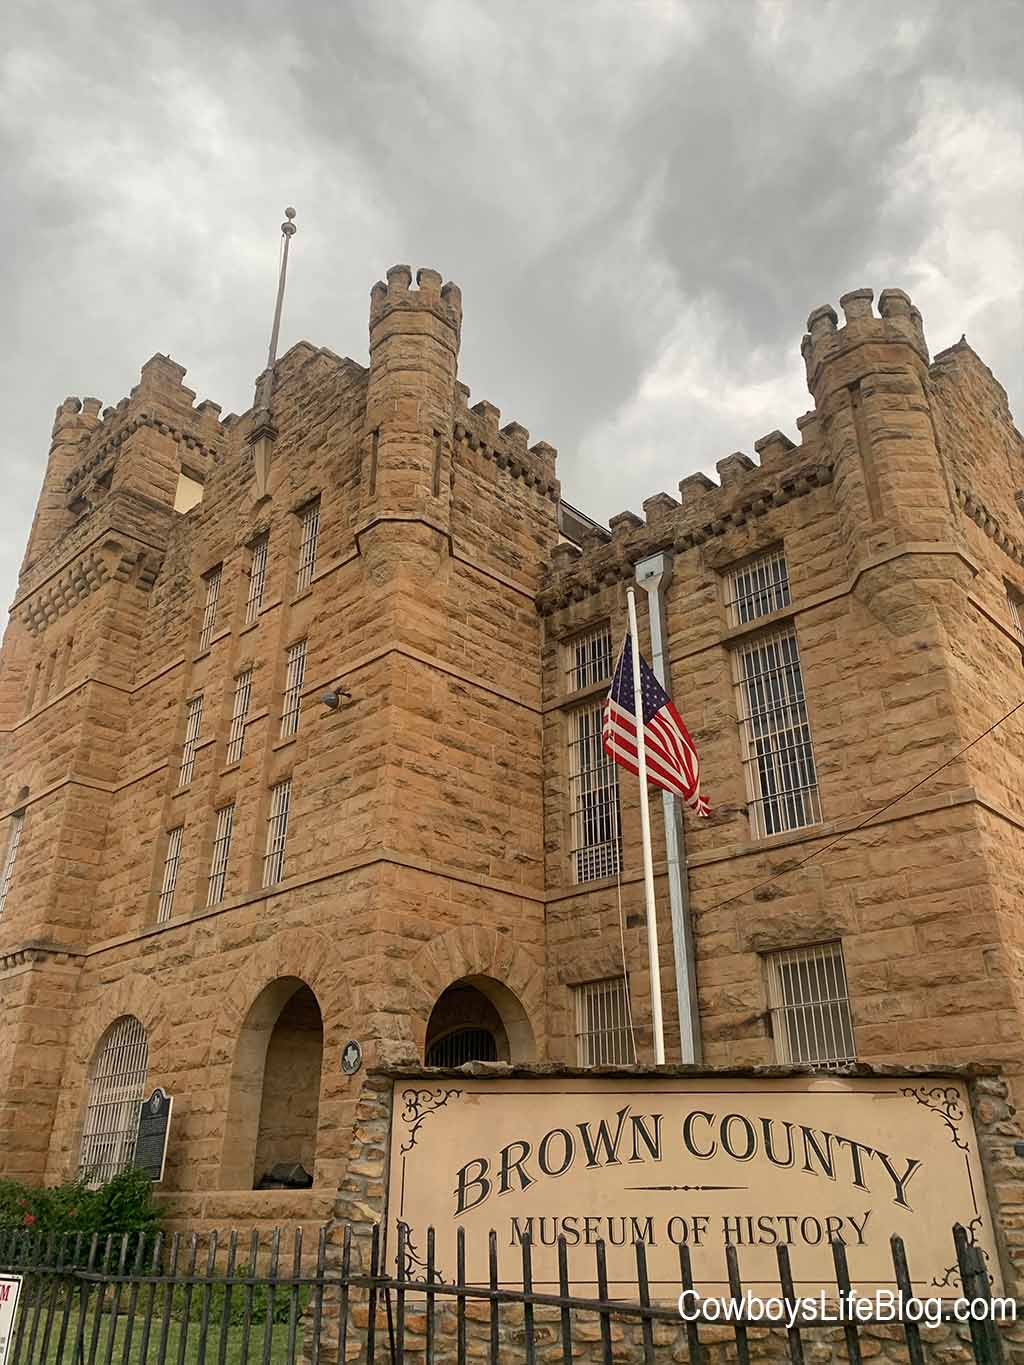 What to eat, see and do in Brownwood, Texas | travel Texas | family vacation | Brownwood, Texas | Texas small towns #visitbrownwood #traveltexas #feelslikehome